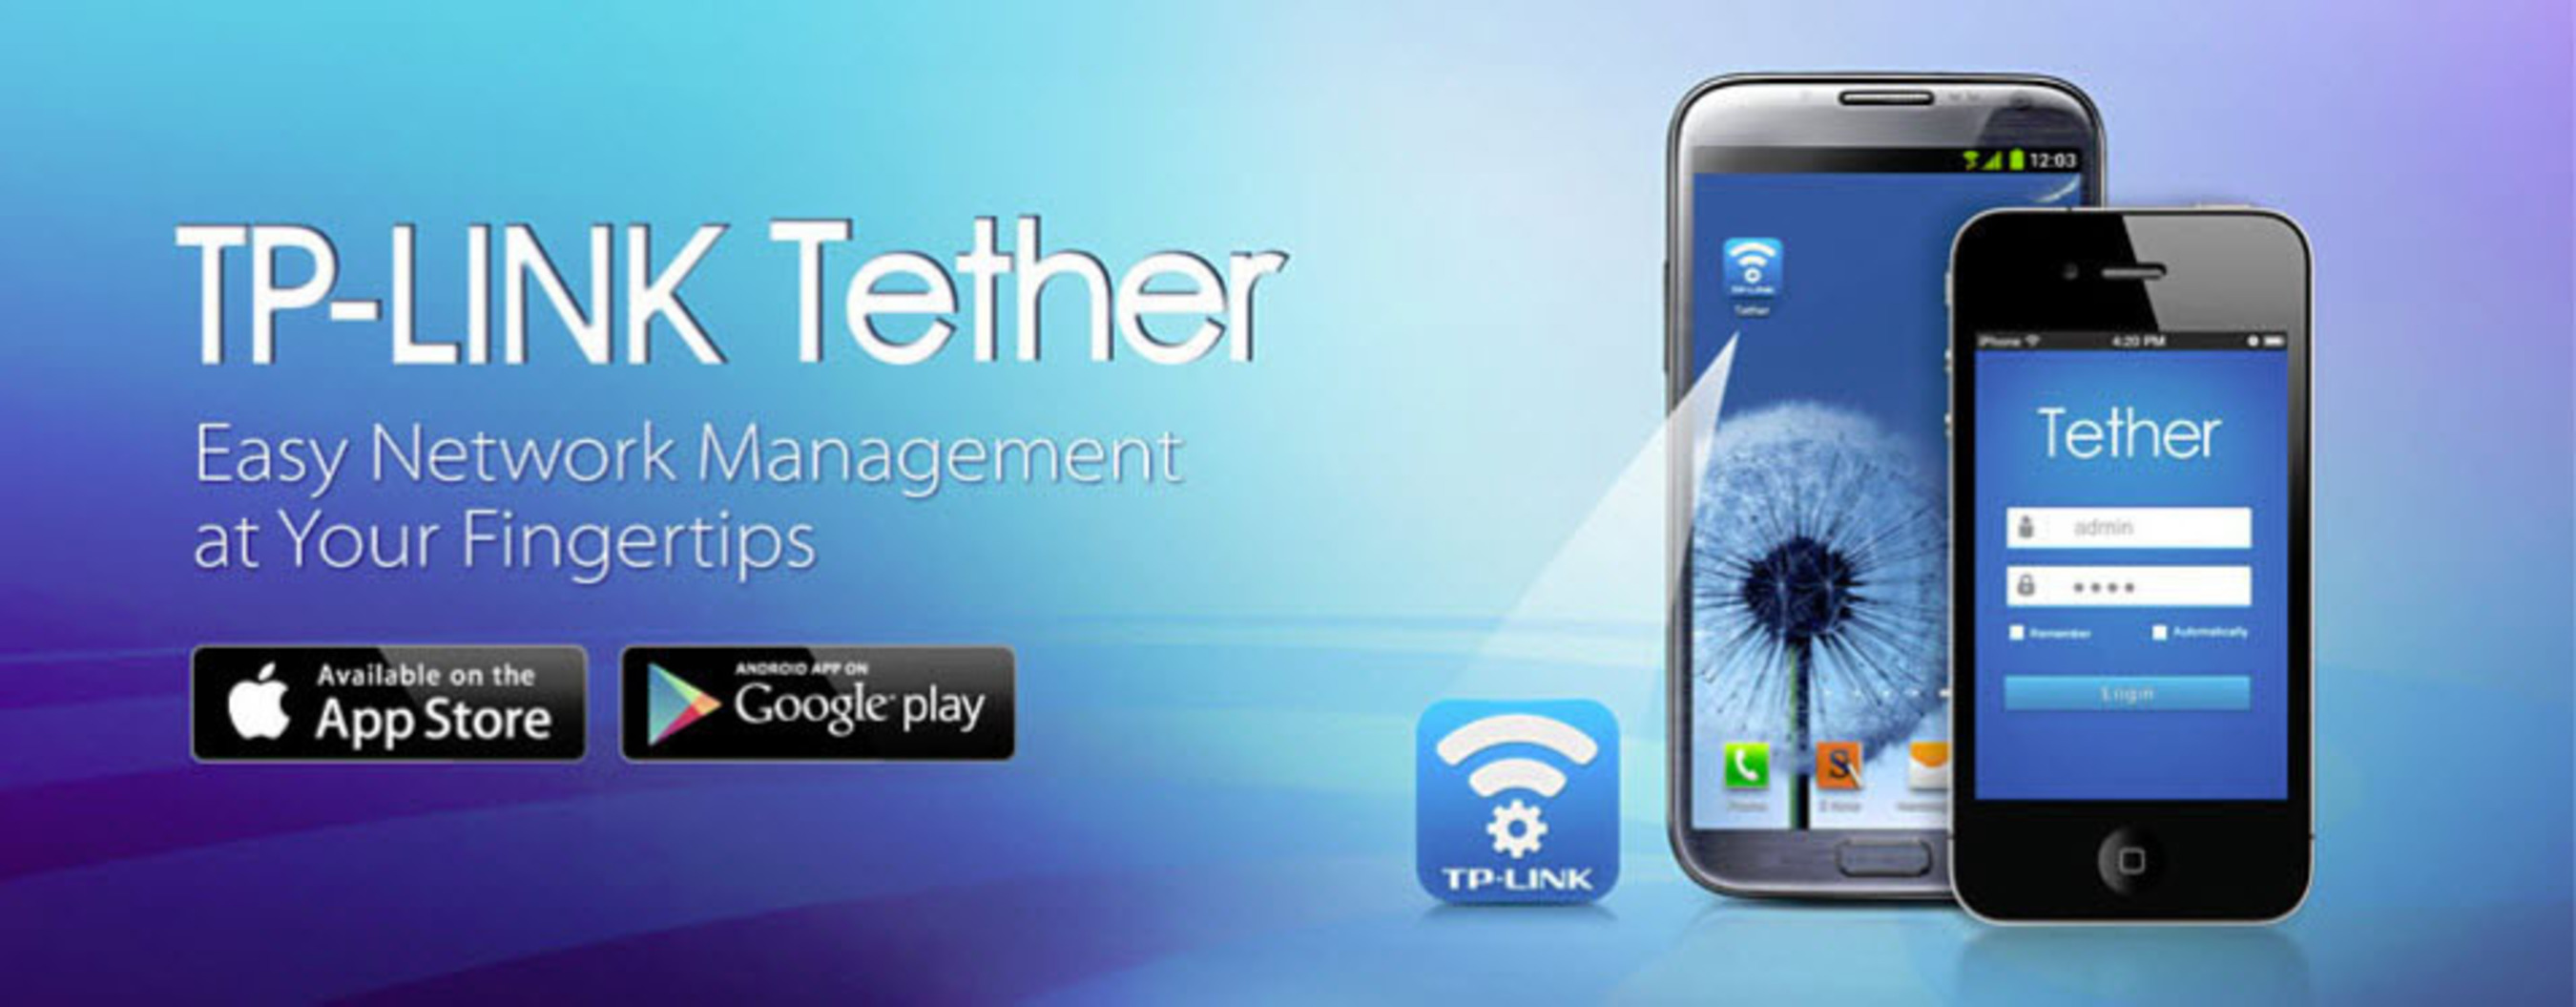 tether.com android app